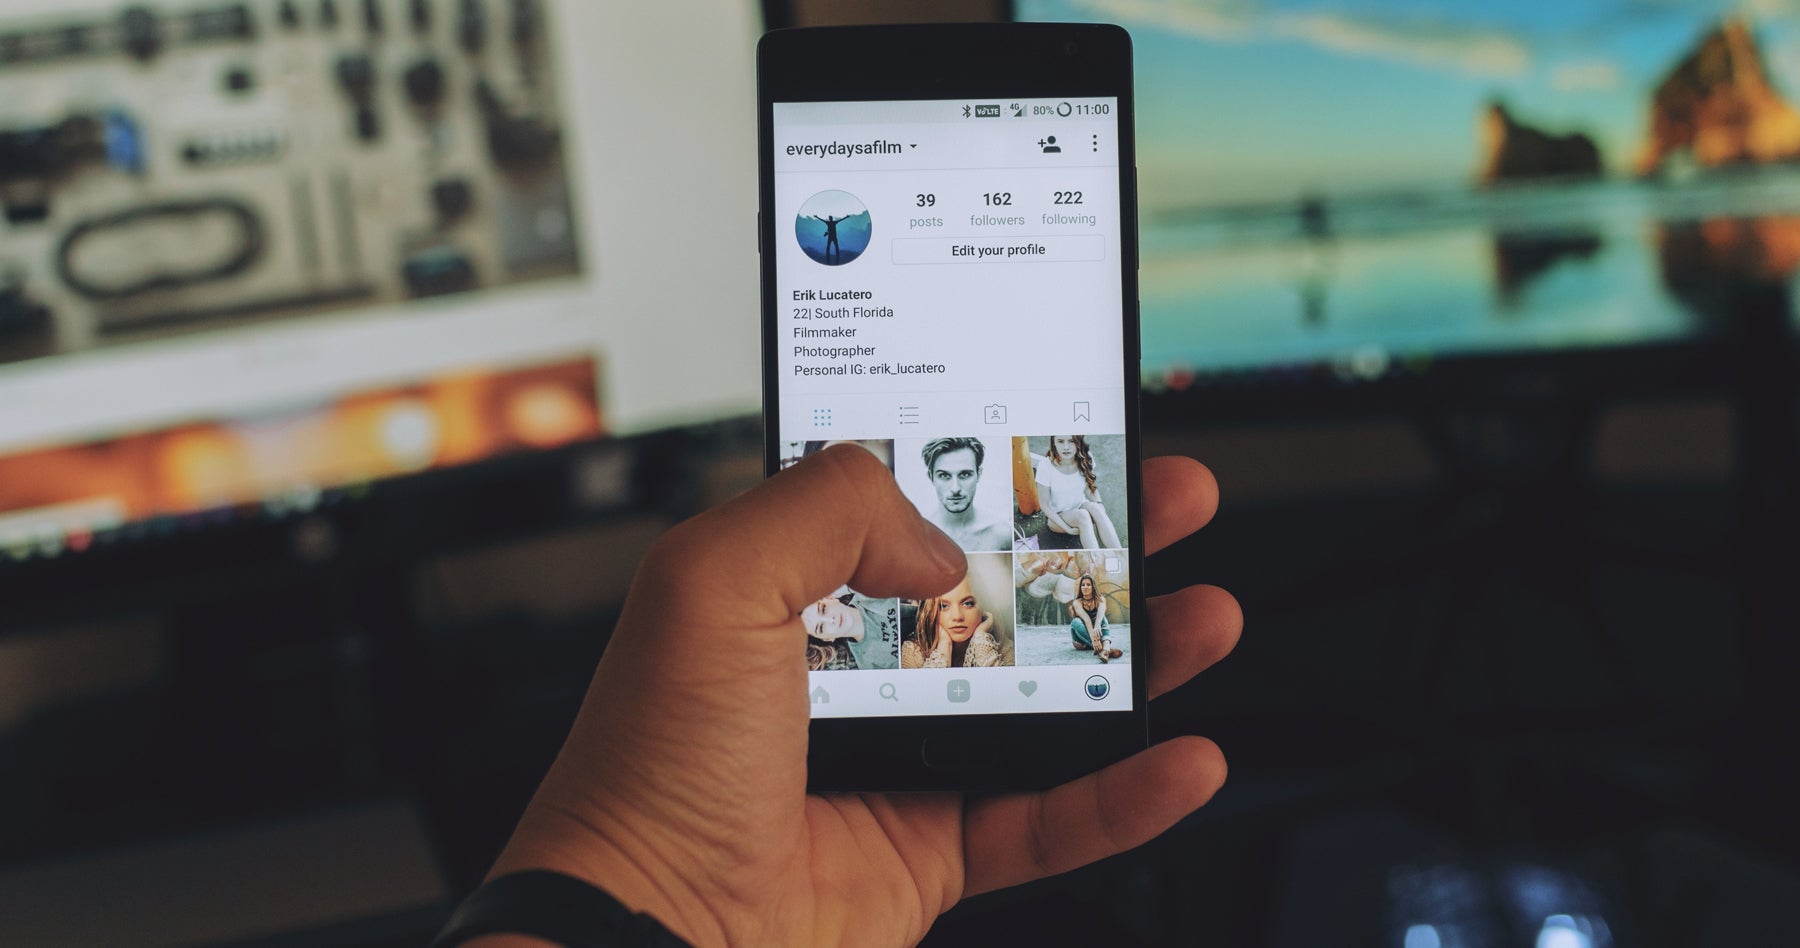 10 Instagram Tools That Marketers Should Use for Instagram